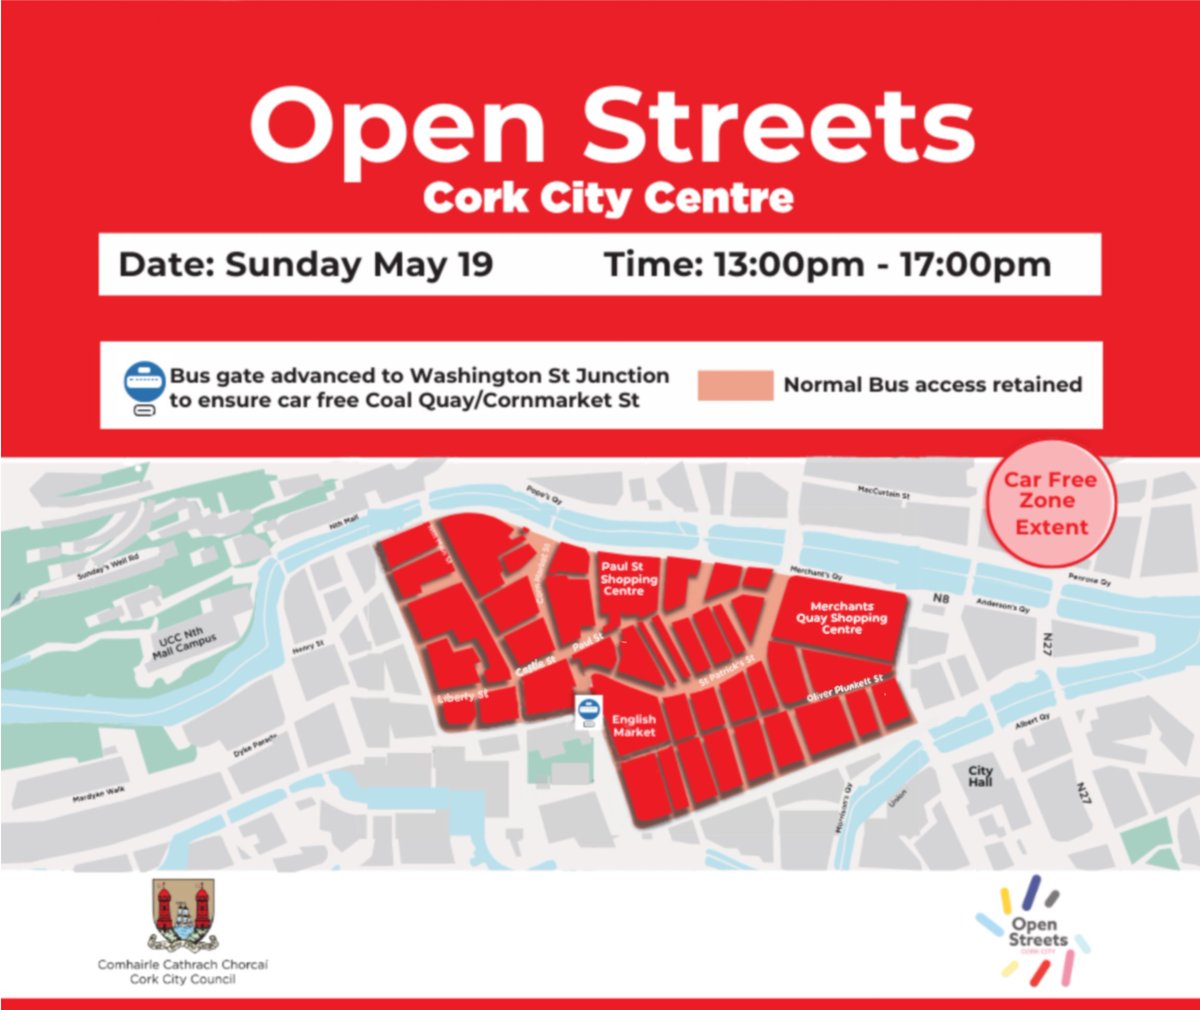 Cork City will host a series of 'Open Streets' events in the city centre this summer. Members of the public are encouraged to come to town on these days without their car. The first event will take place on Sunday, 19 May from 1pm - 5pm. More Info at buff.ly/3UKQ7aO